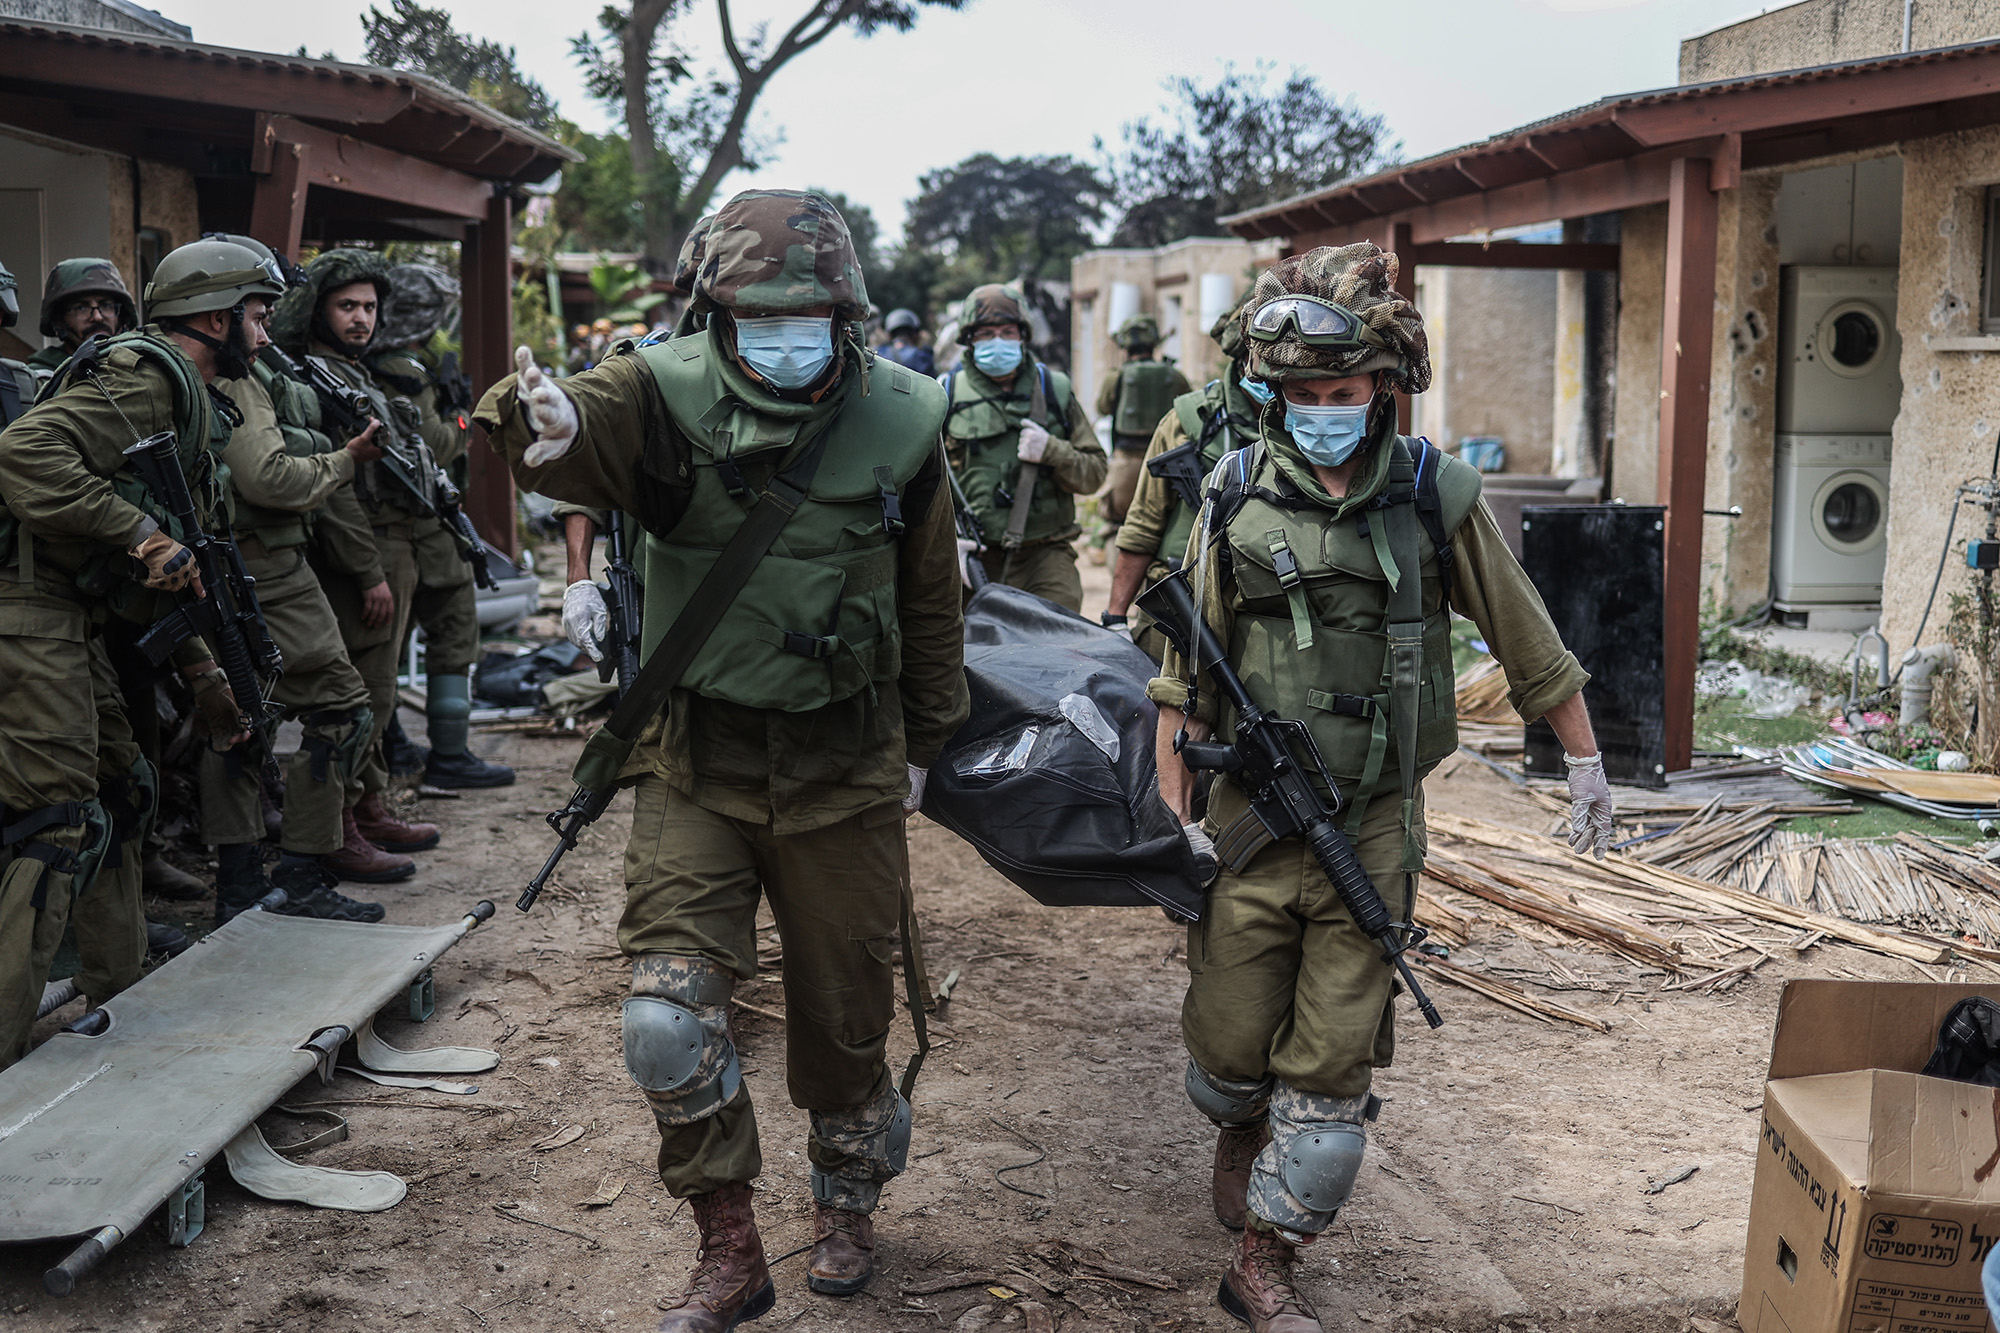 Israeli forces extract the dead bodies of Israeli residents from a destroyed house in Kfar Aza, Israel, on October 10.